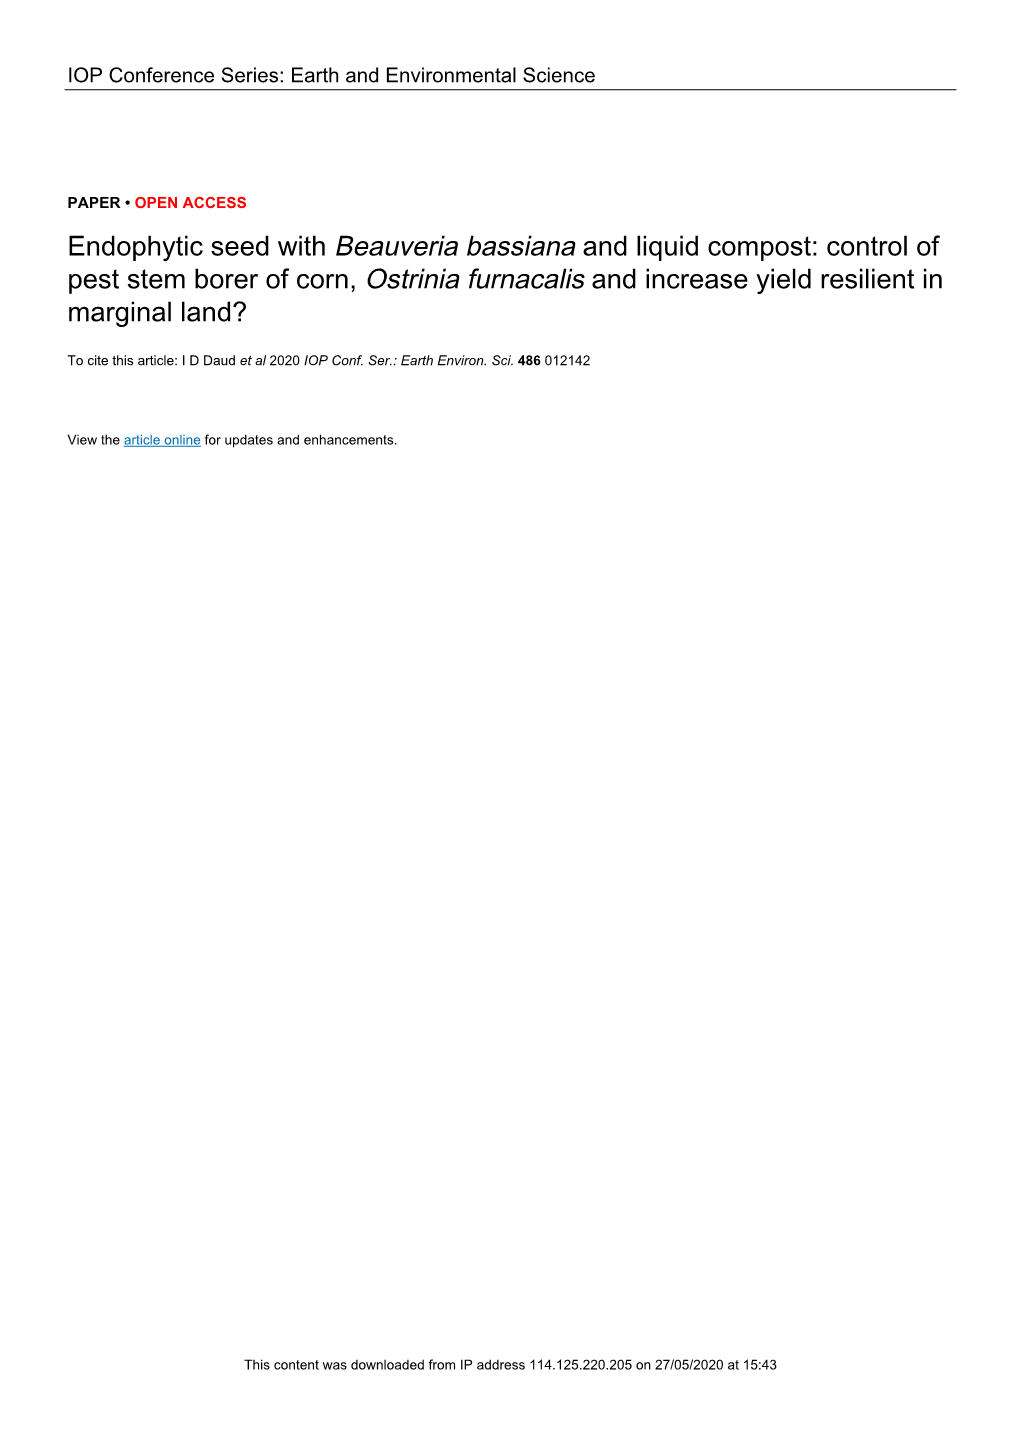 Endophytic Seed with Beauveria Bassiana and Liquid Compost: Control of Pest Stem Borer of Corn, Ostrinia Furnacalis and Increase Yield Resilient in Marginal Land?